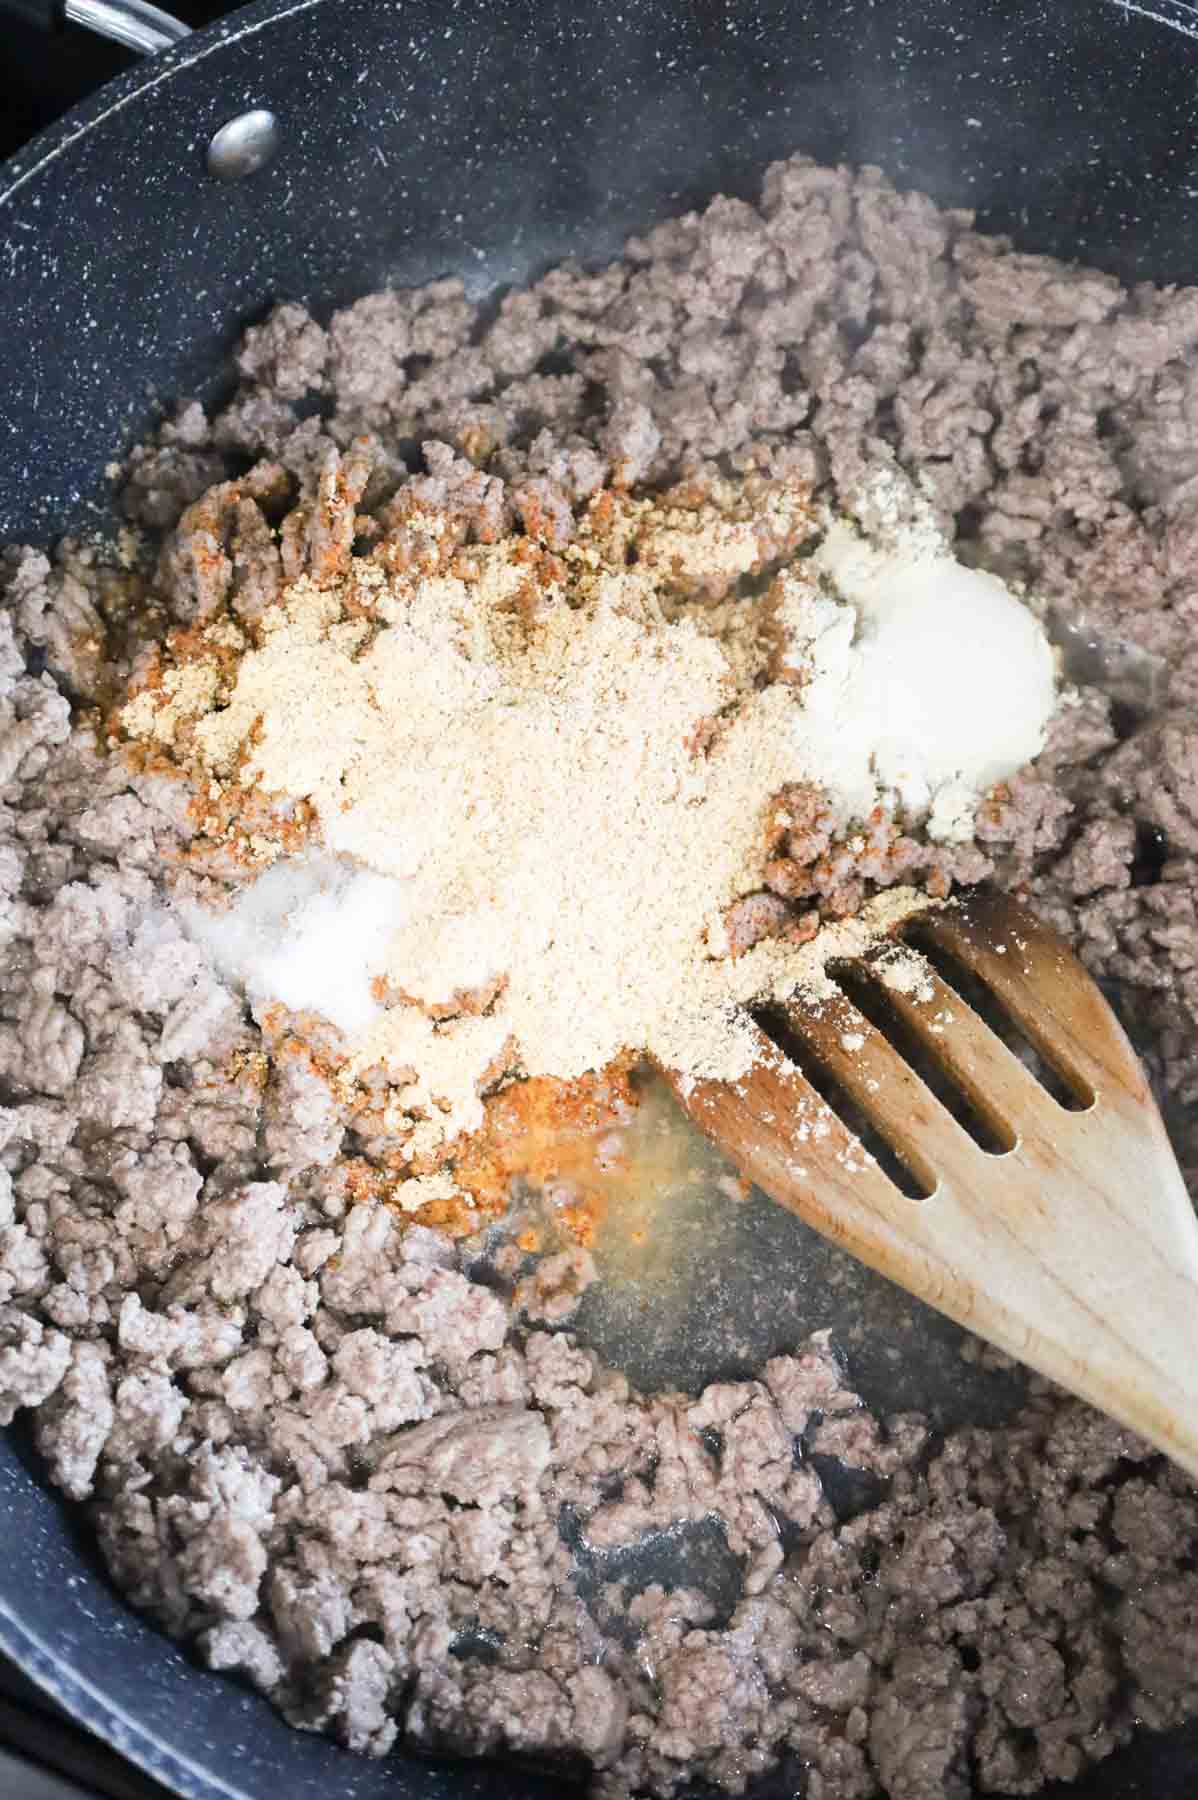 taco seasoning, onion power, salt and water added to skillet with cooked ground beef